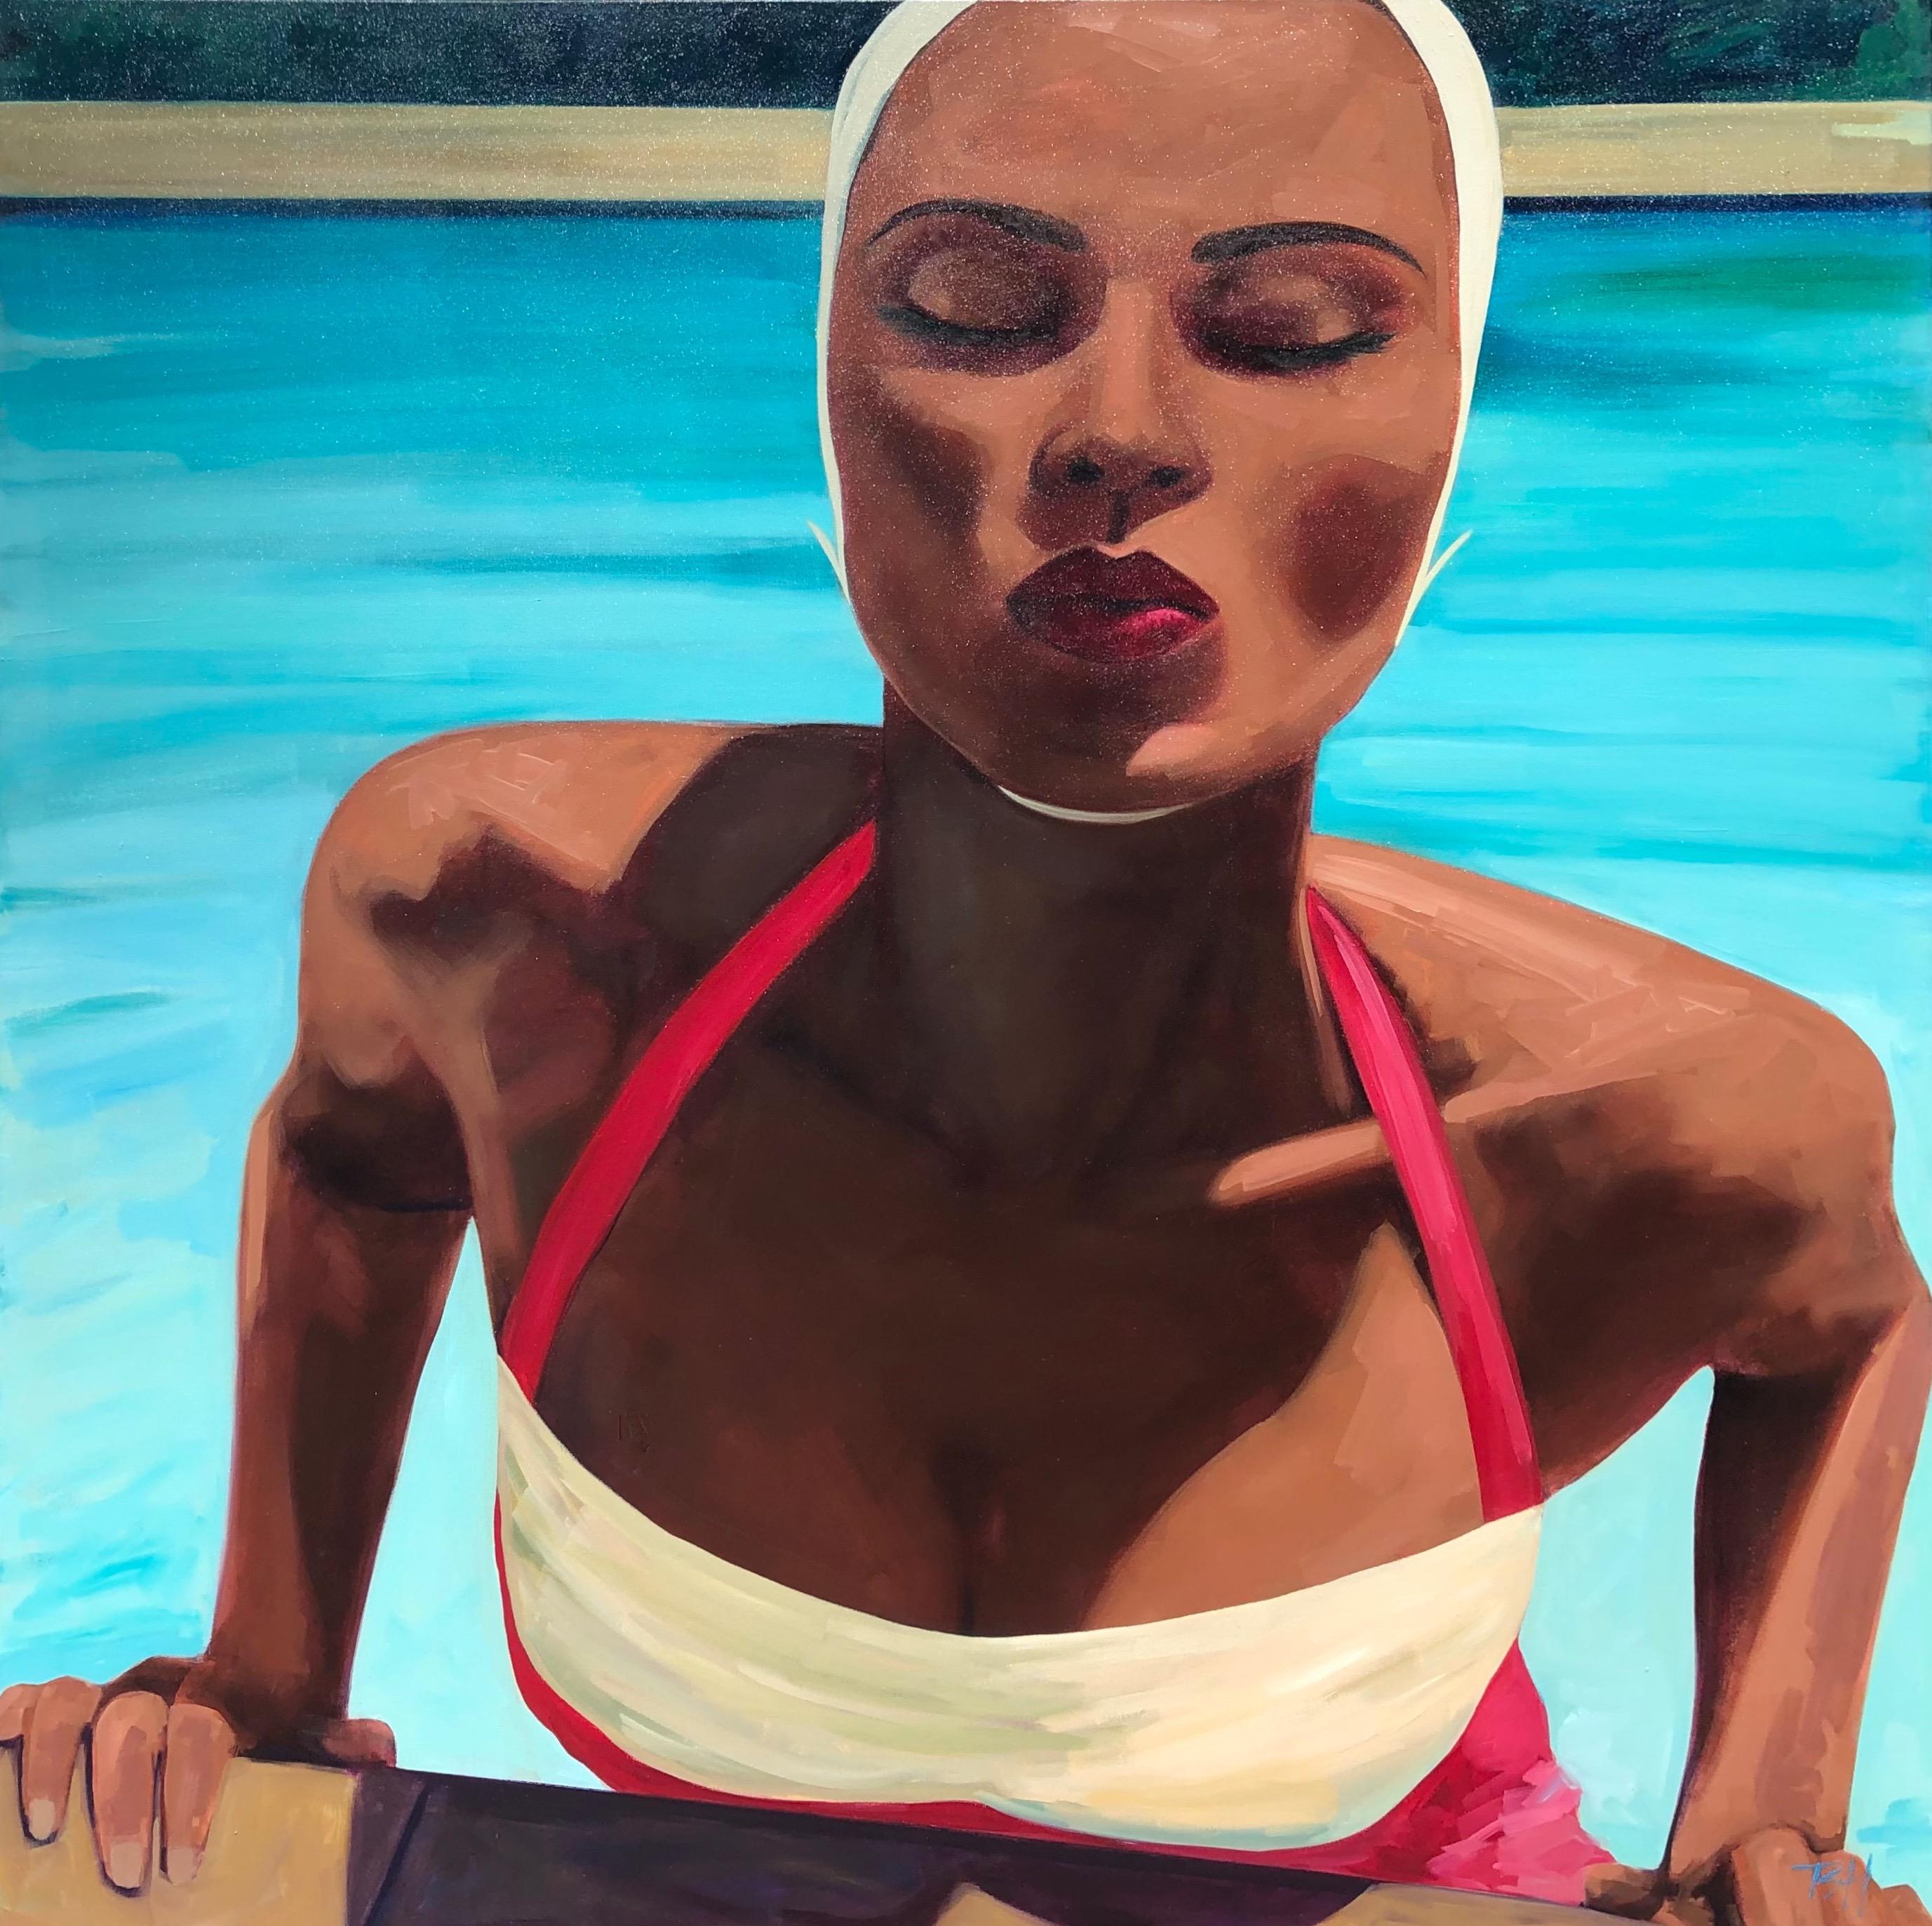 "The Big Kiss" oil painting of a woman blowing a kiss as she gets out of a pool